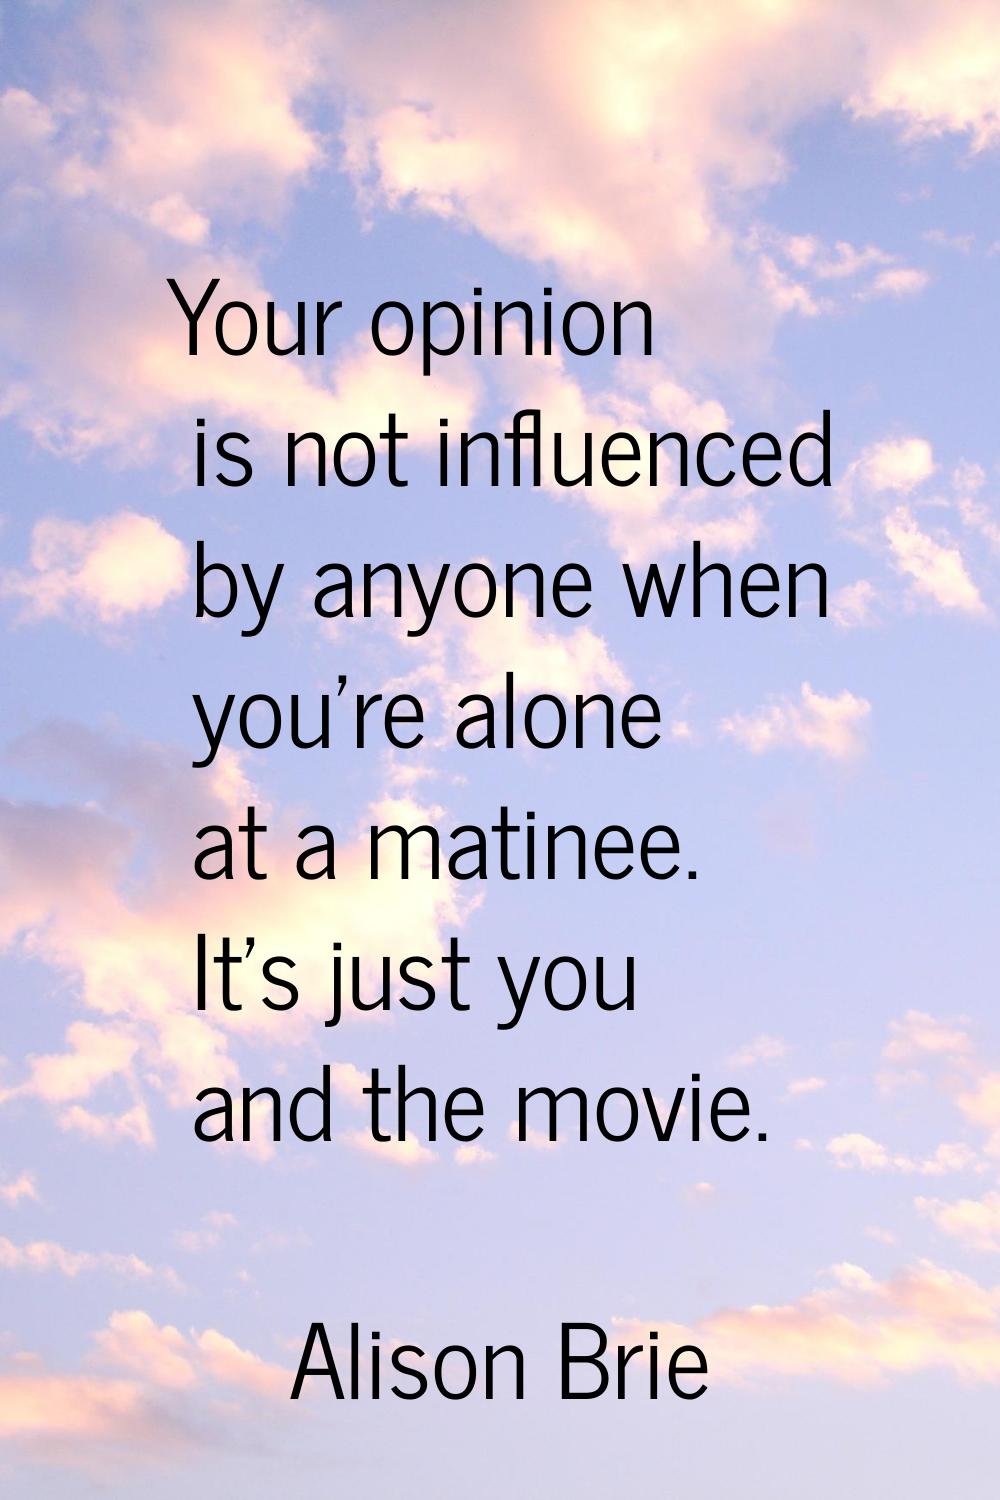 Your opinion is not influenced by anyone when you're alone at a matinee. It's just you and the movi